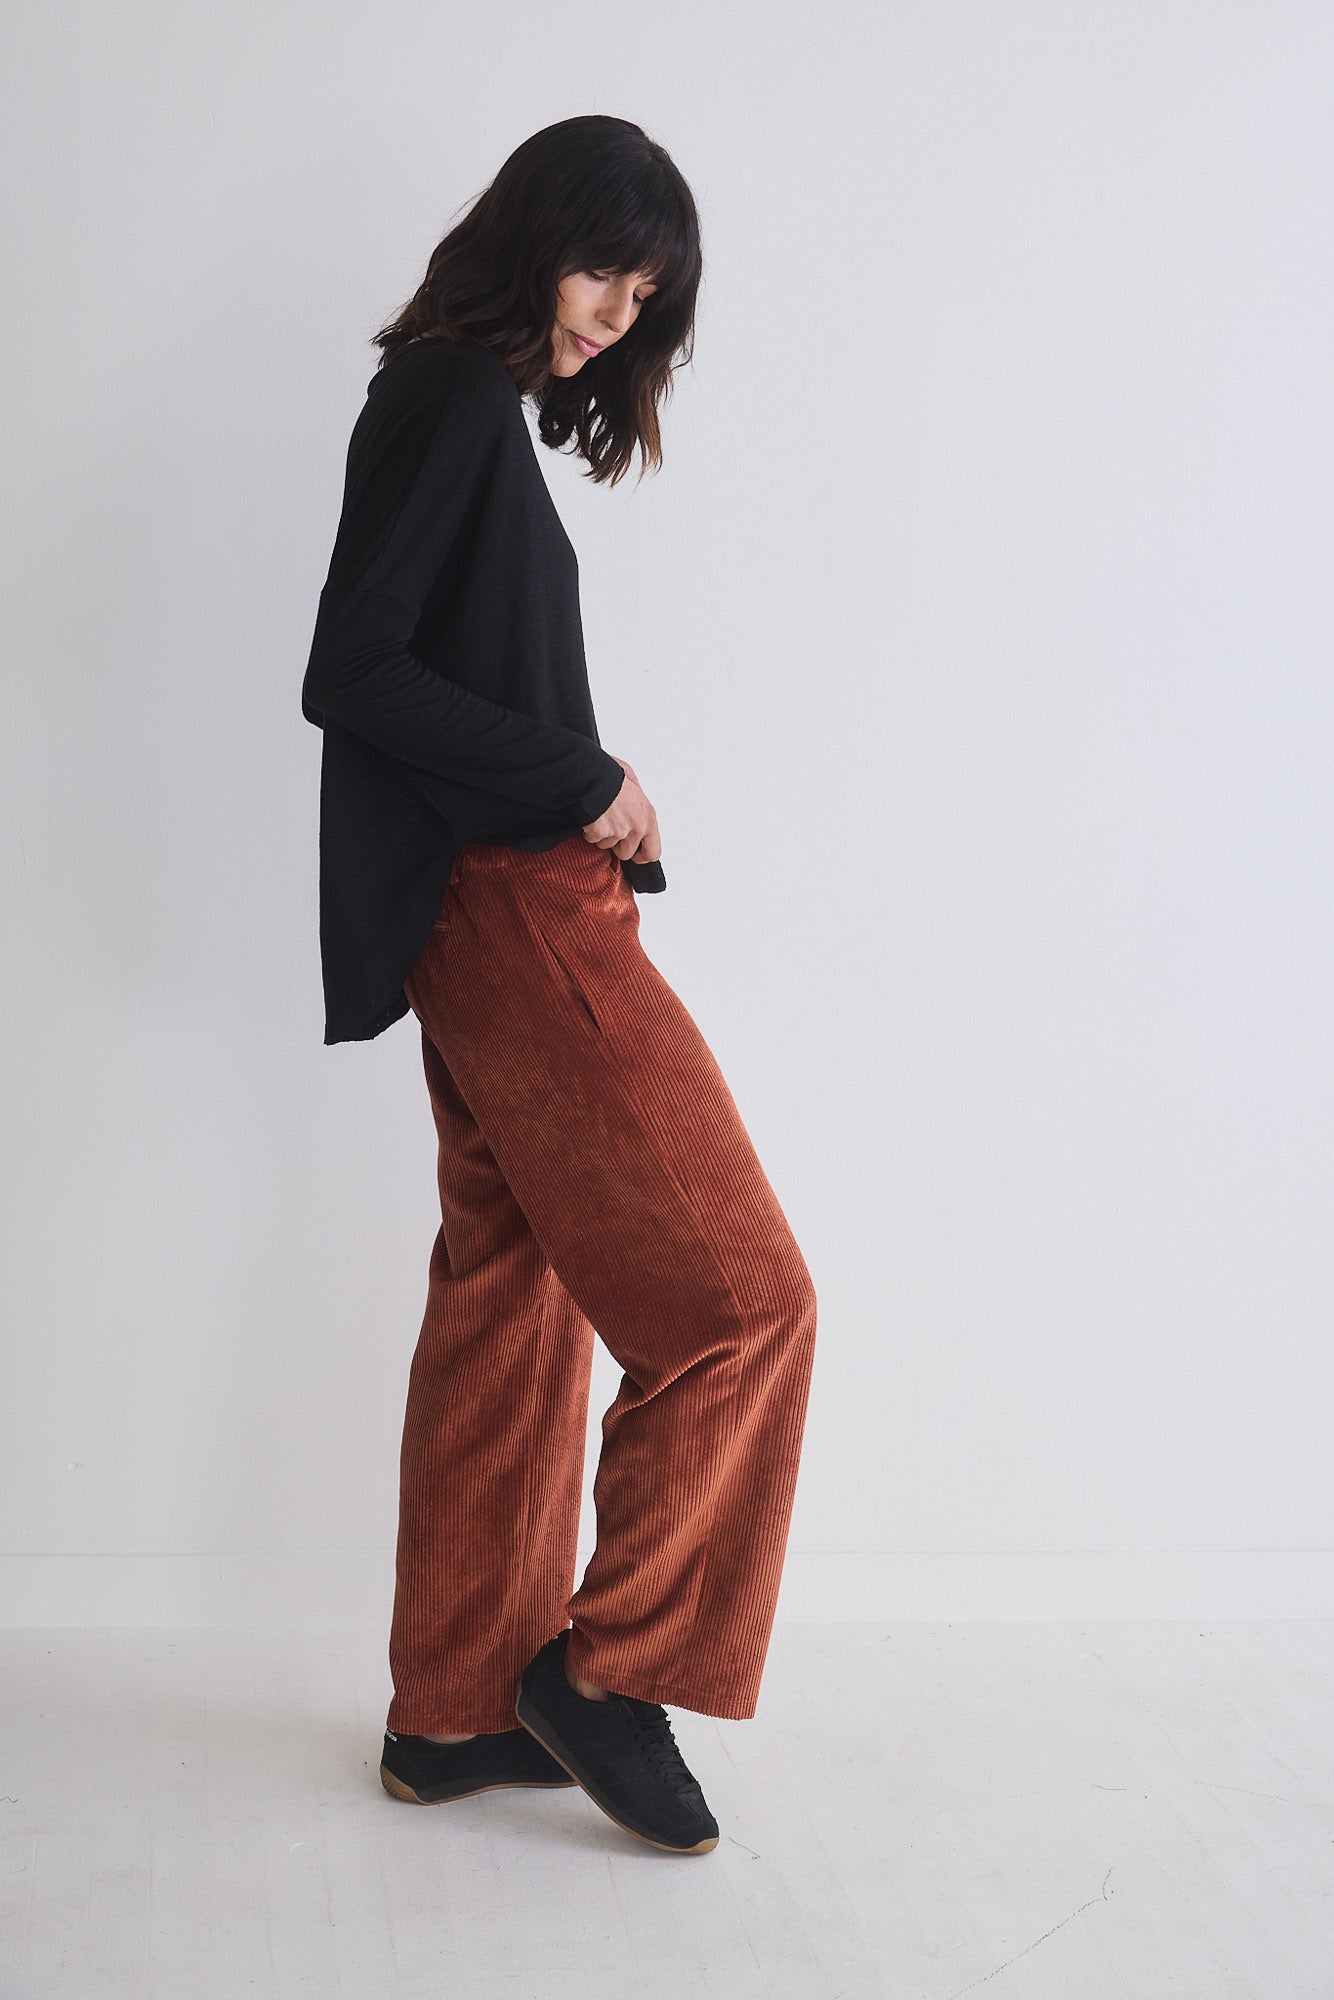 The Corduroy Pants from the 70s